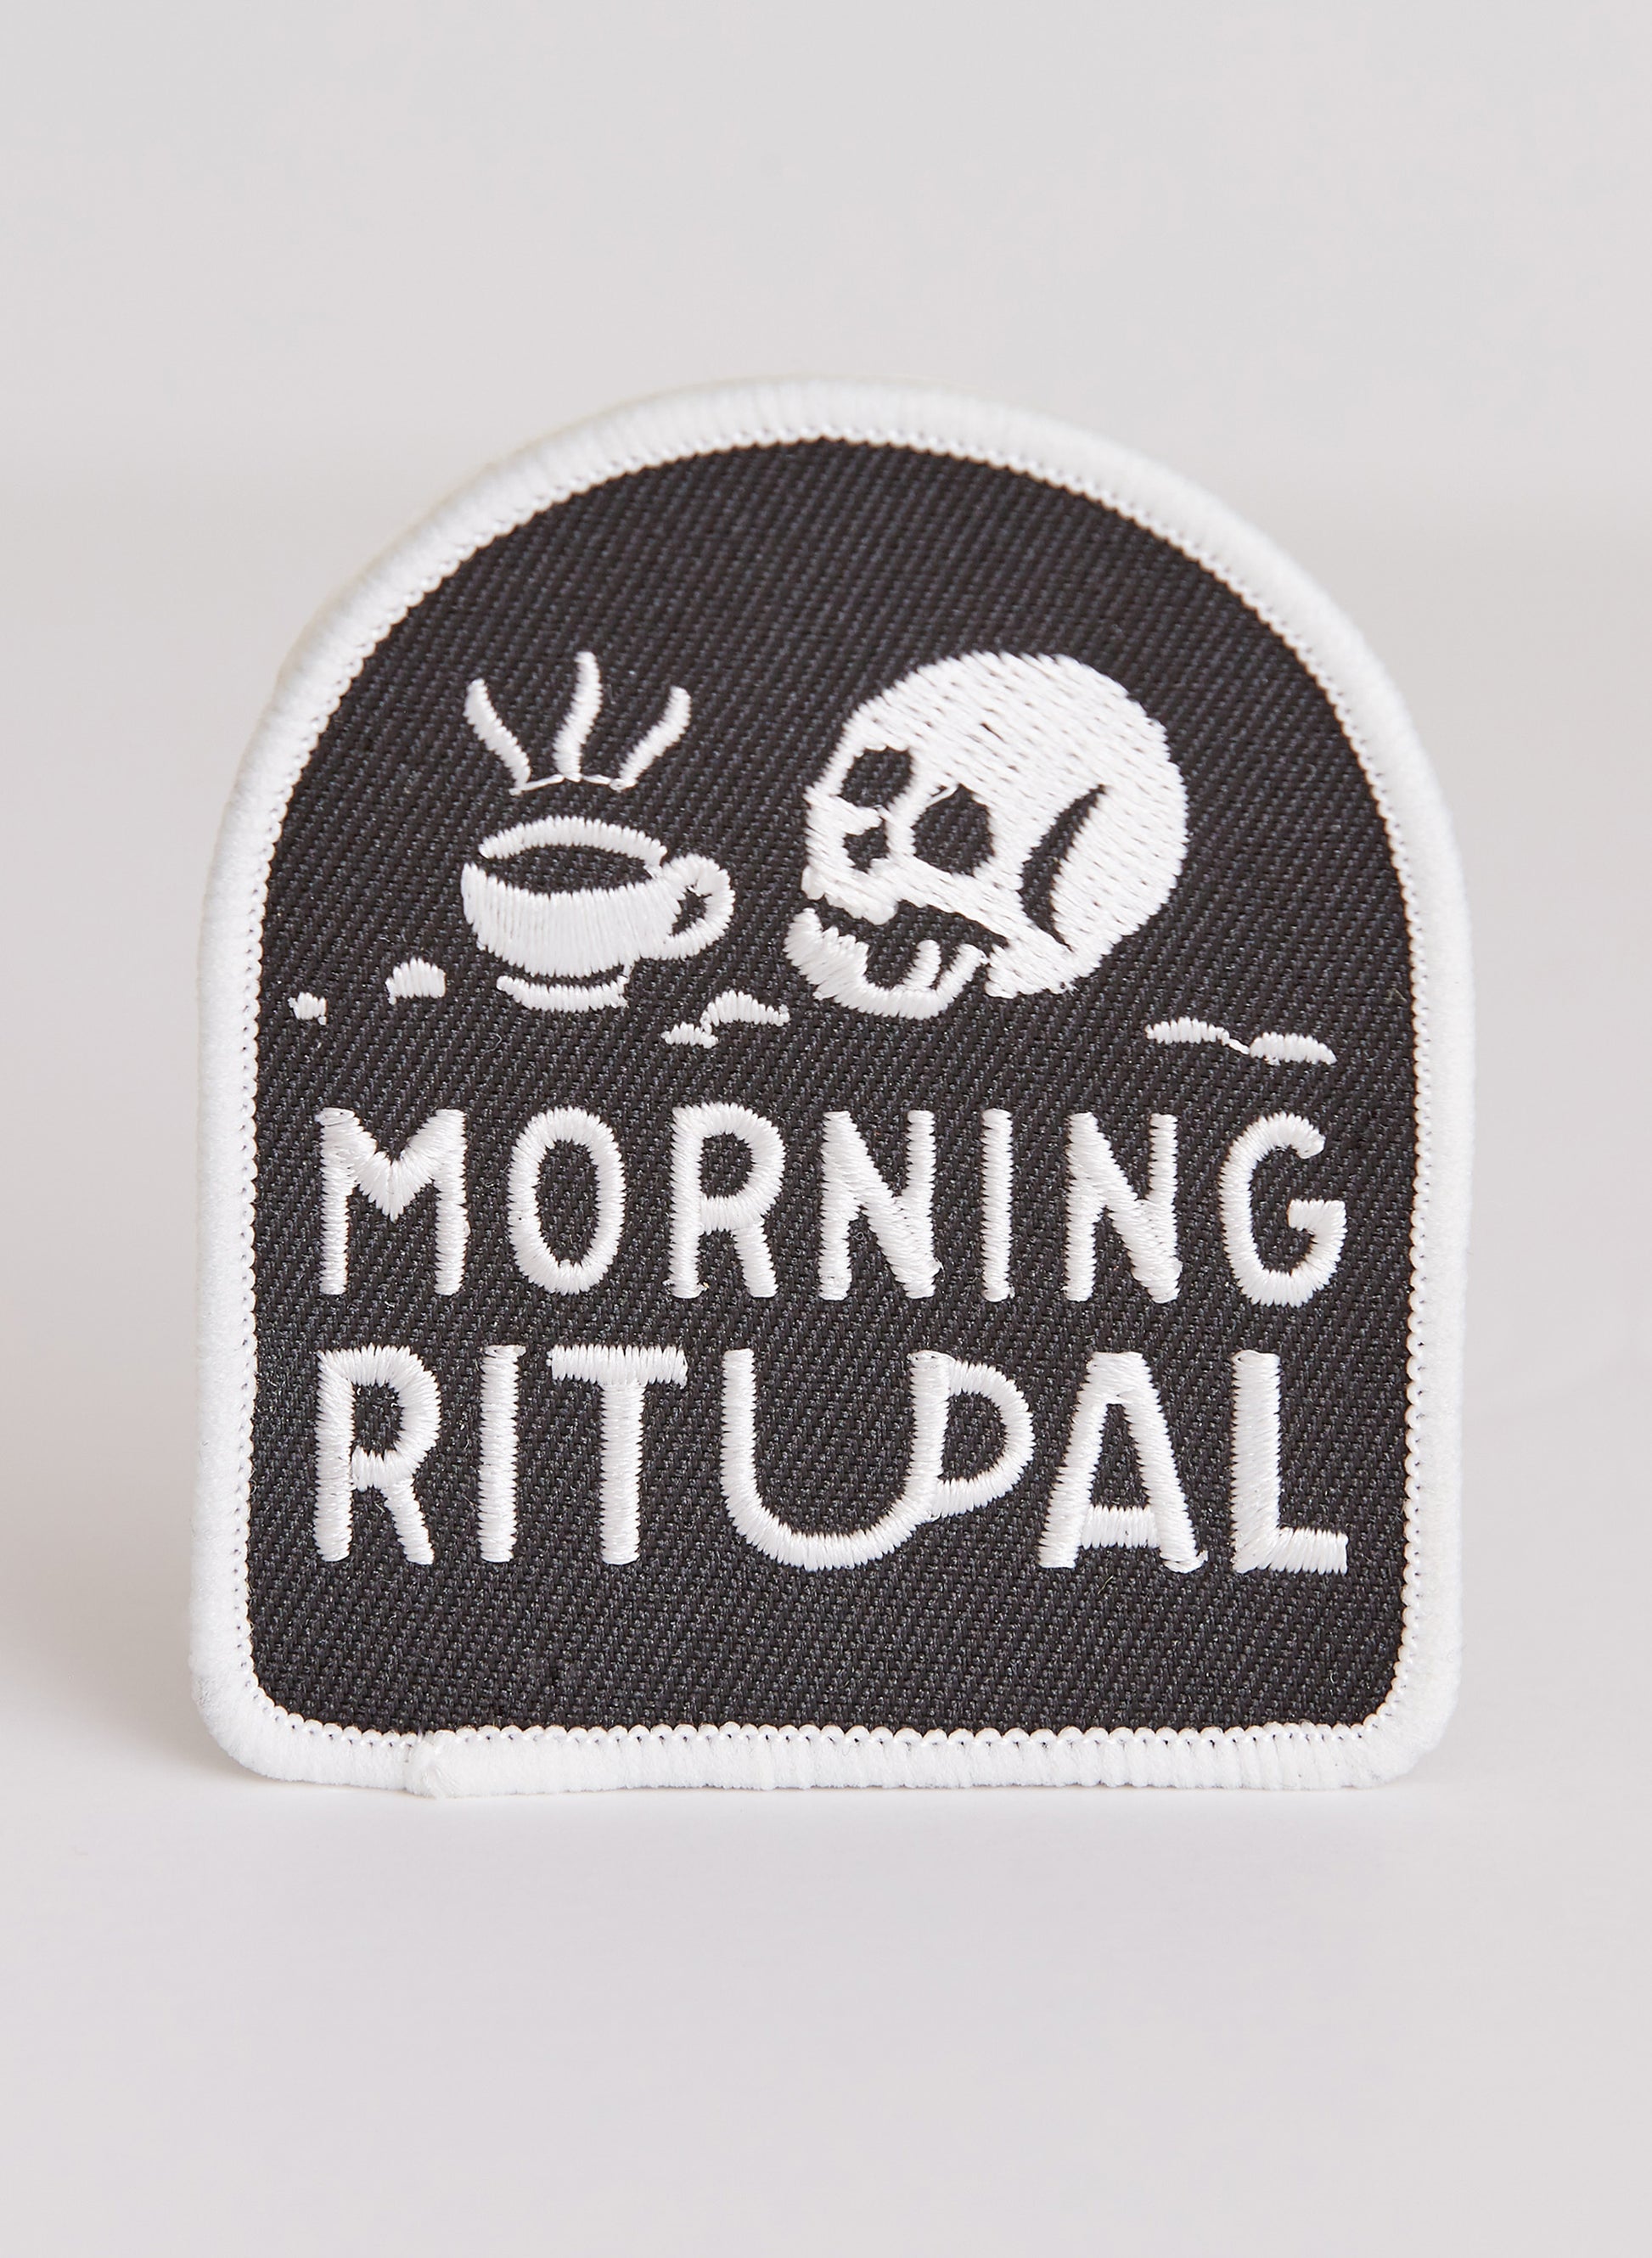 Morning Ritual Black Coffee Skull Iron-on Embroidered Patch